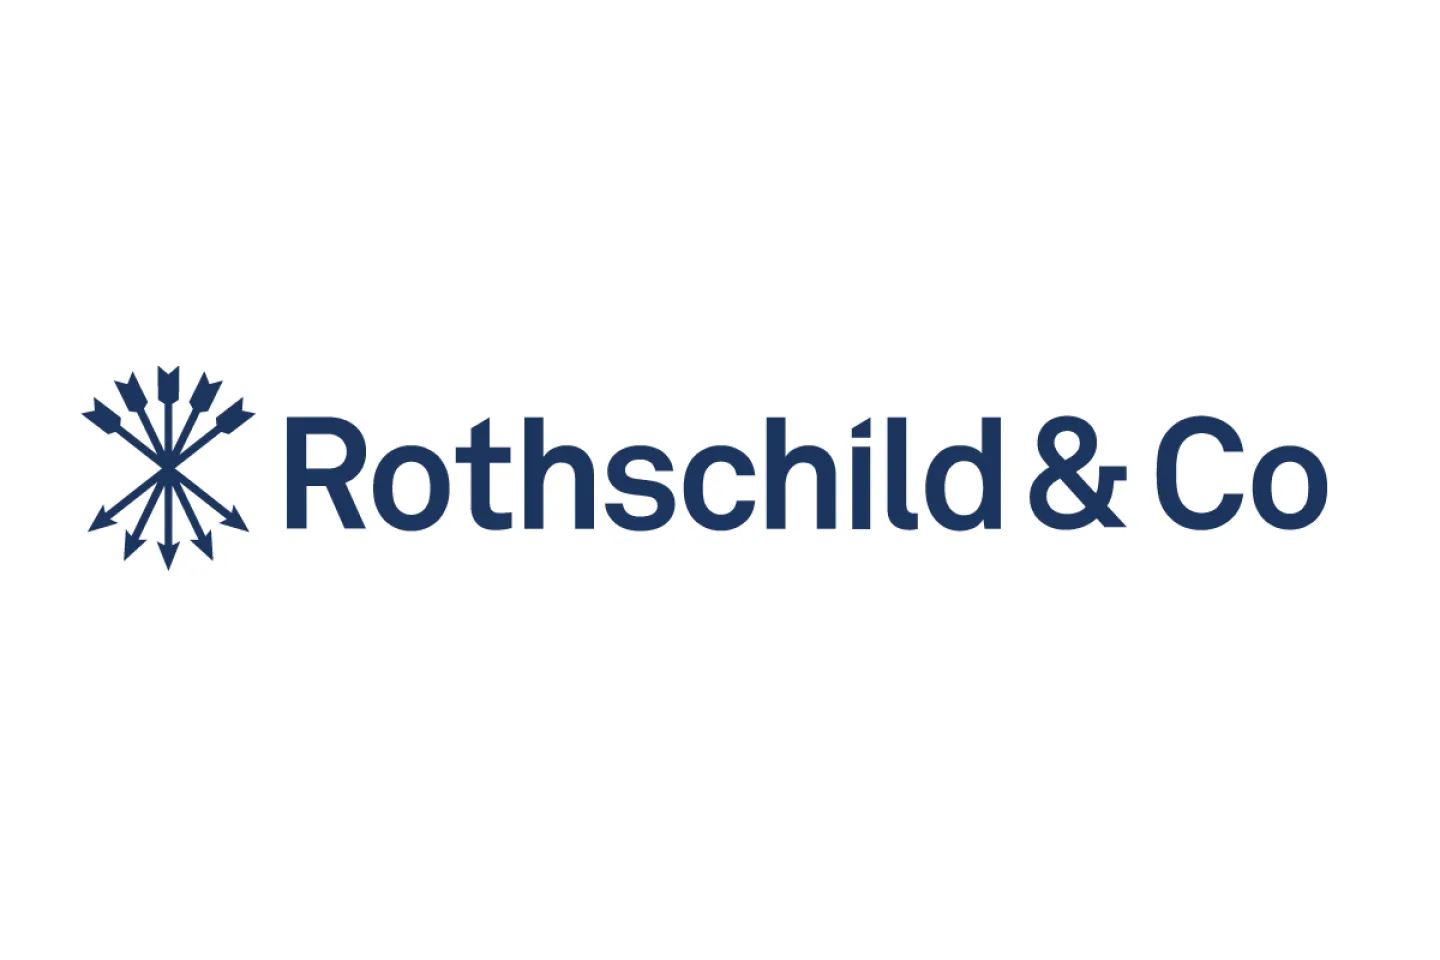 Rothschild and Co